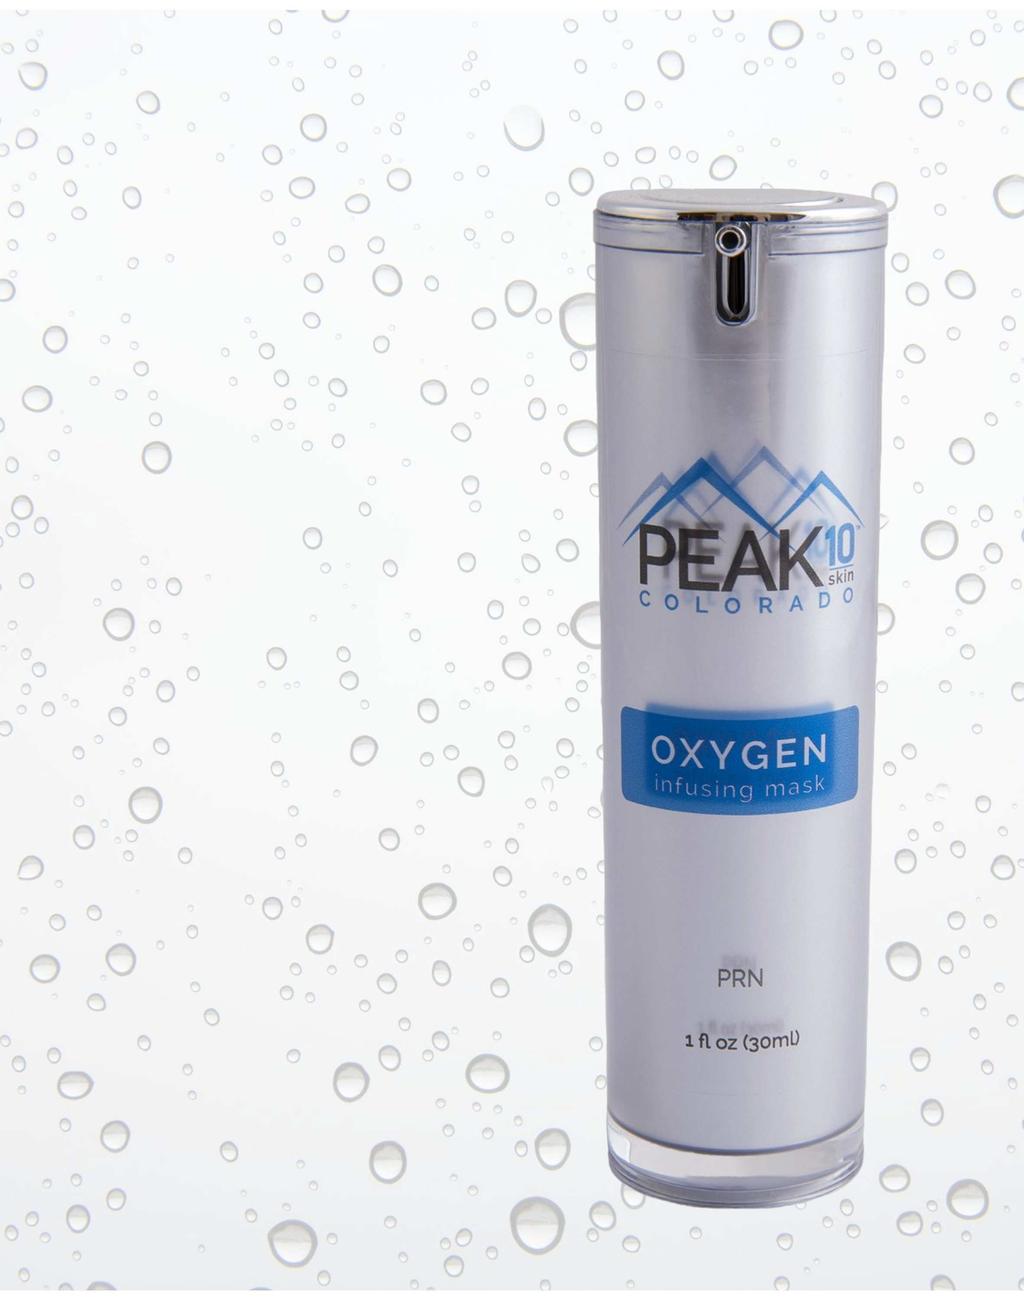 OXYGEN revitalizing mask Benefits: Glowy Dewy Calm SKIN ALL SKIN TYPES Tips for use: Apply on clean skin.